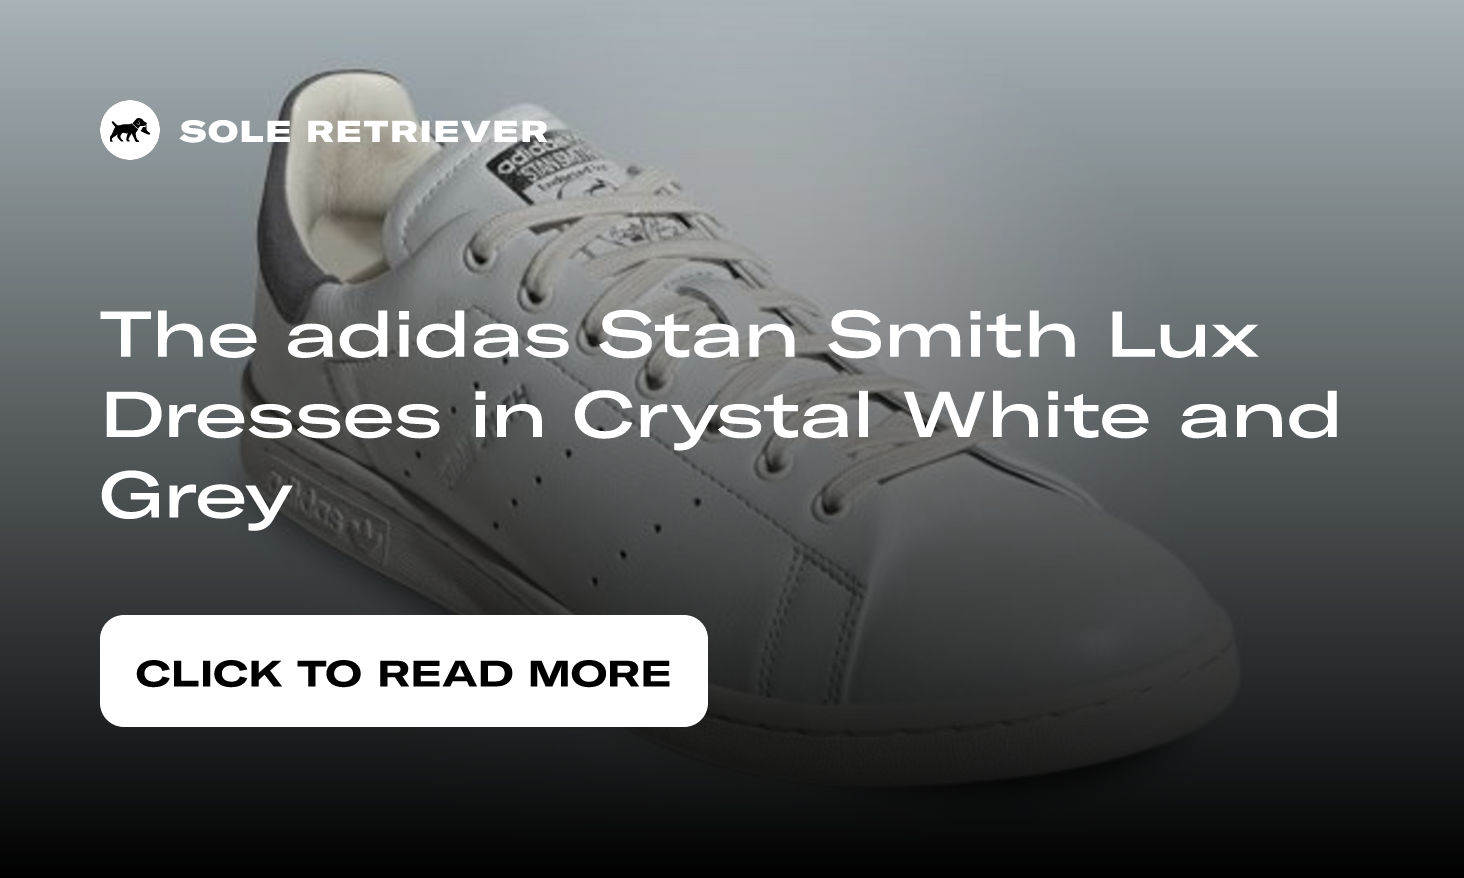 Steal Alert: 30% off Adidas Stan Smith Lux Sneakers